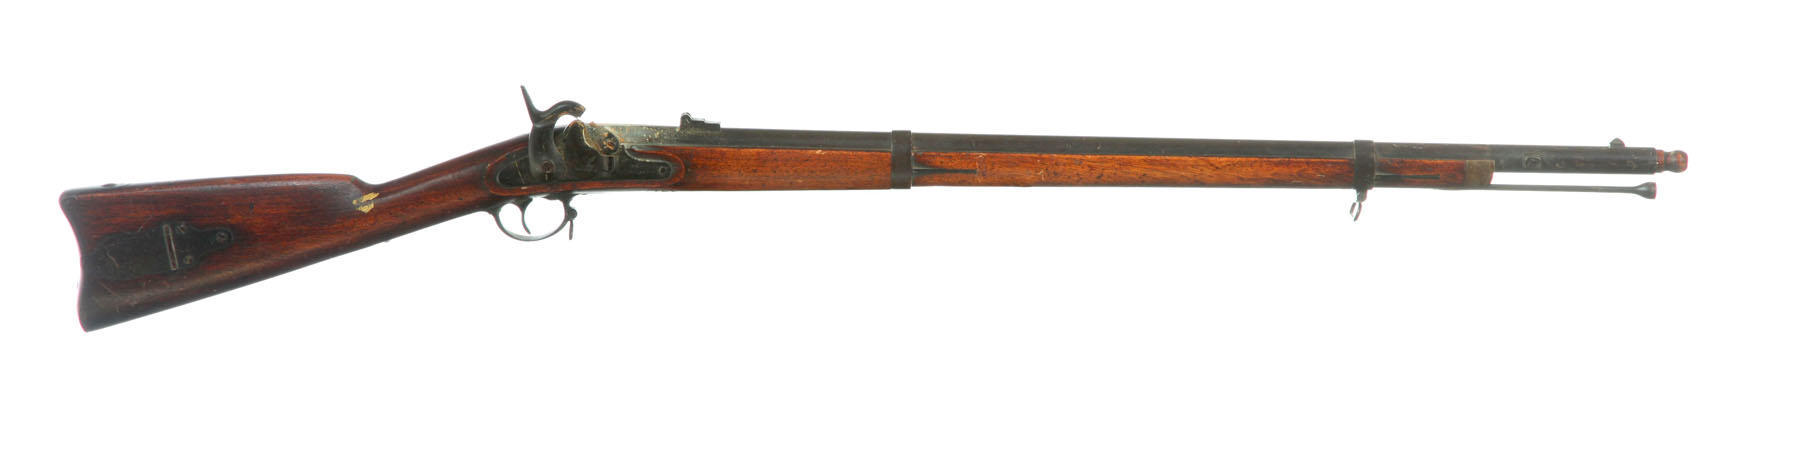  HARPERS FERRY MODEL 1855 RIFLE MUSKET  123849